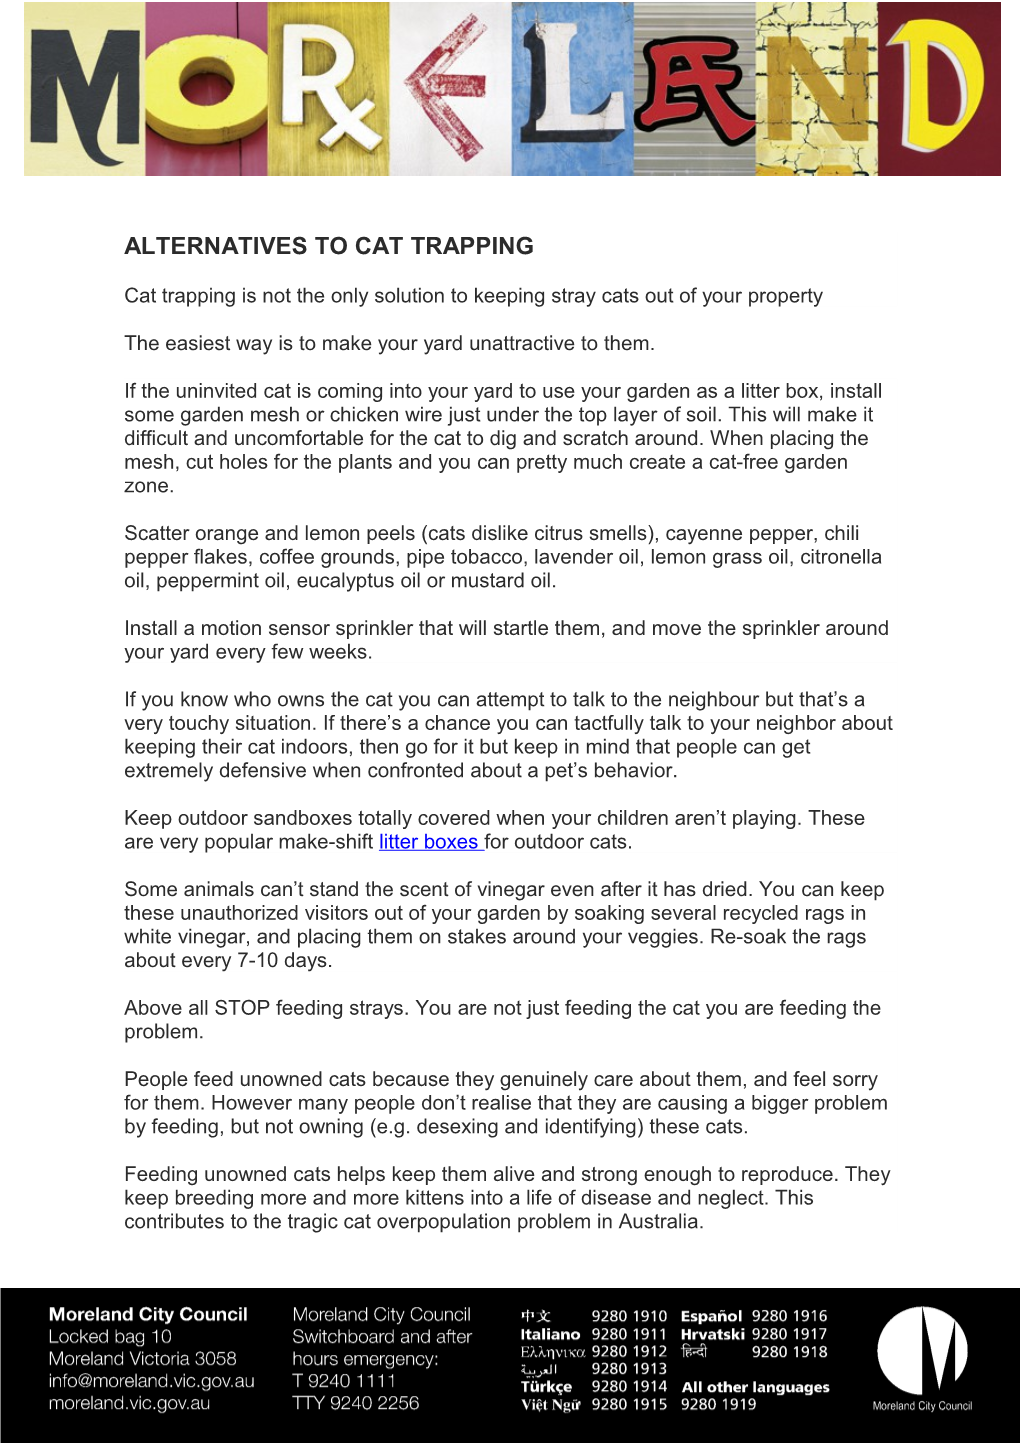 Alternatives to Cat Trapping